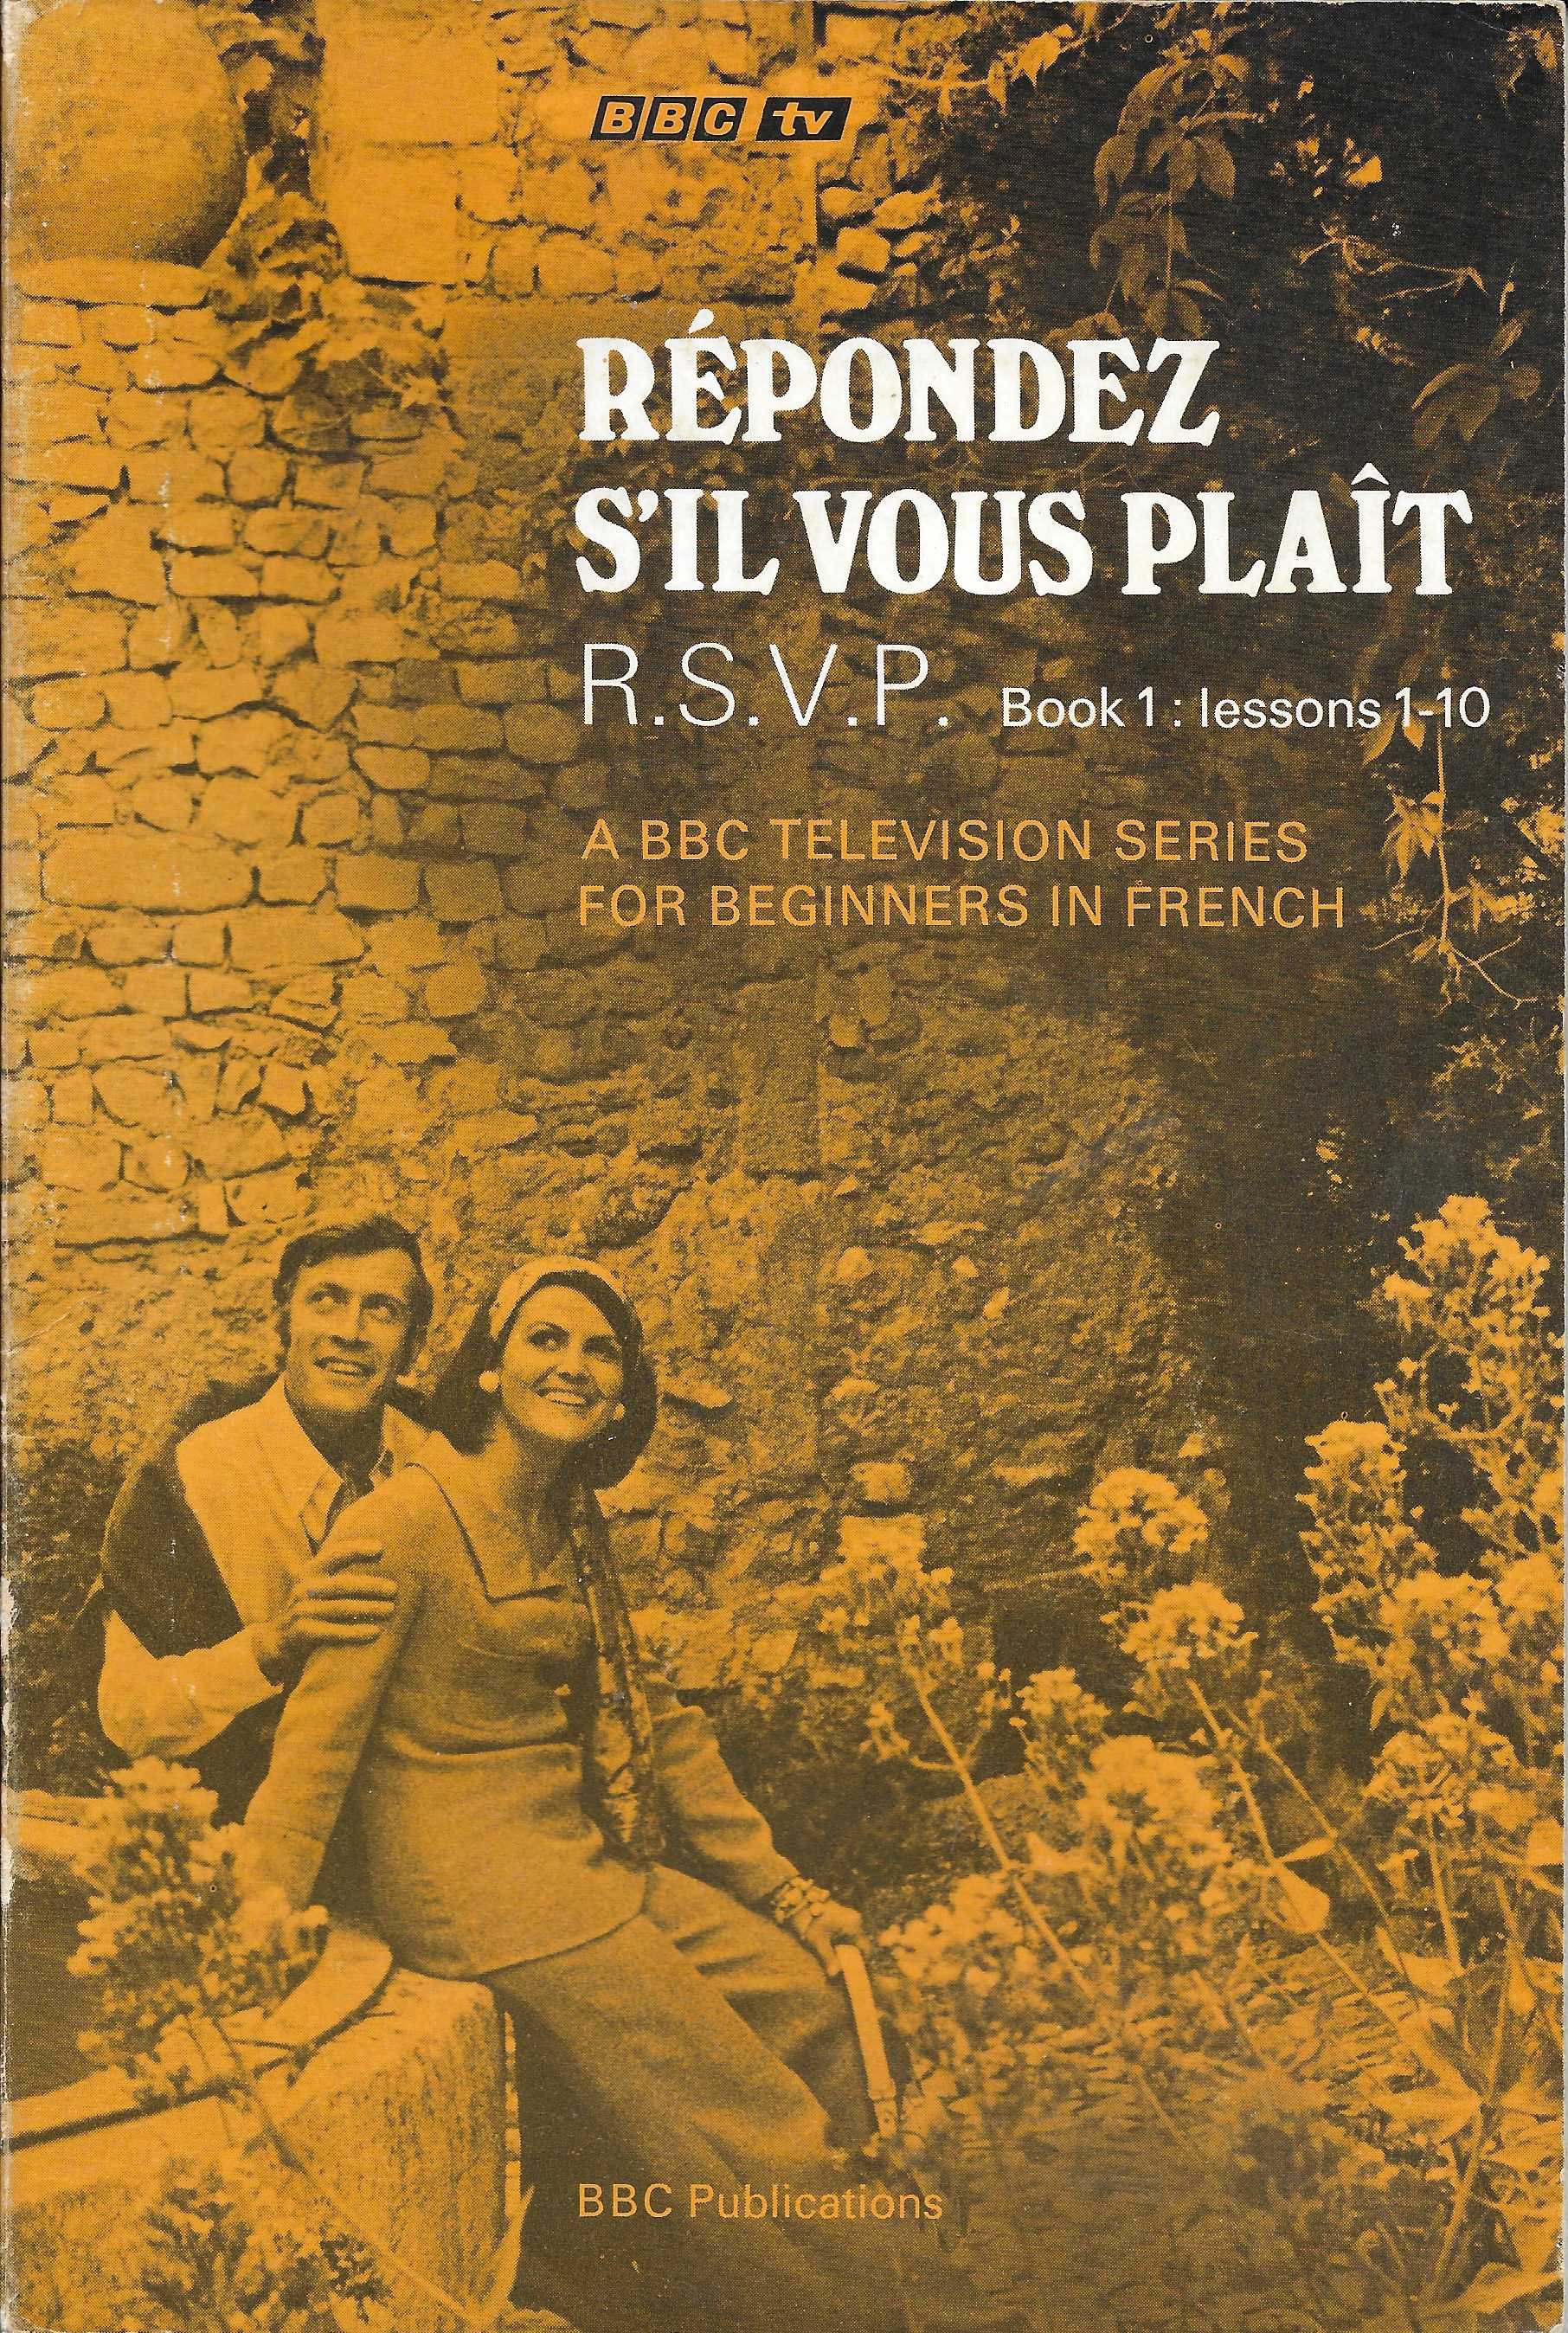 Picture of ISBN 0 563 09067 7 Respondez s'il vous plait R. S. V. P. - Lessons 1 - 10 by artist Max Bellancourt / Joseph Cremona from the BBC books - Records and Tapes library